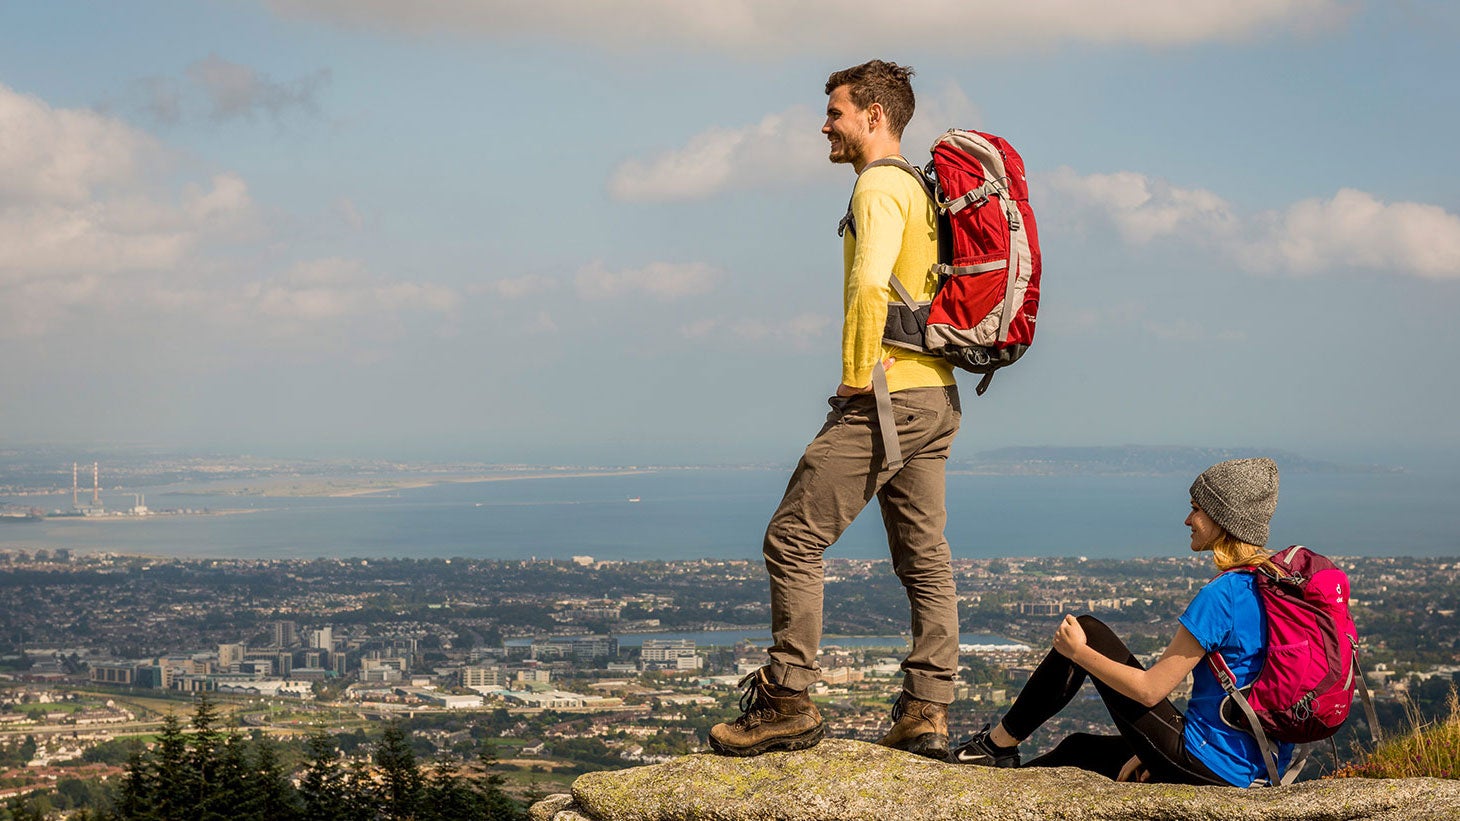 Two people standing on rocks admiring the views from Three Rock Mountain, County Dublin